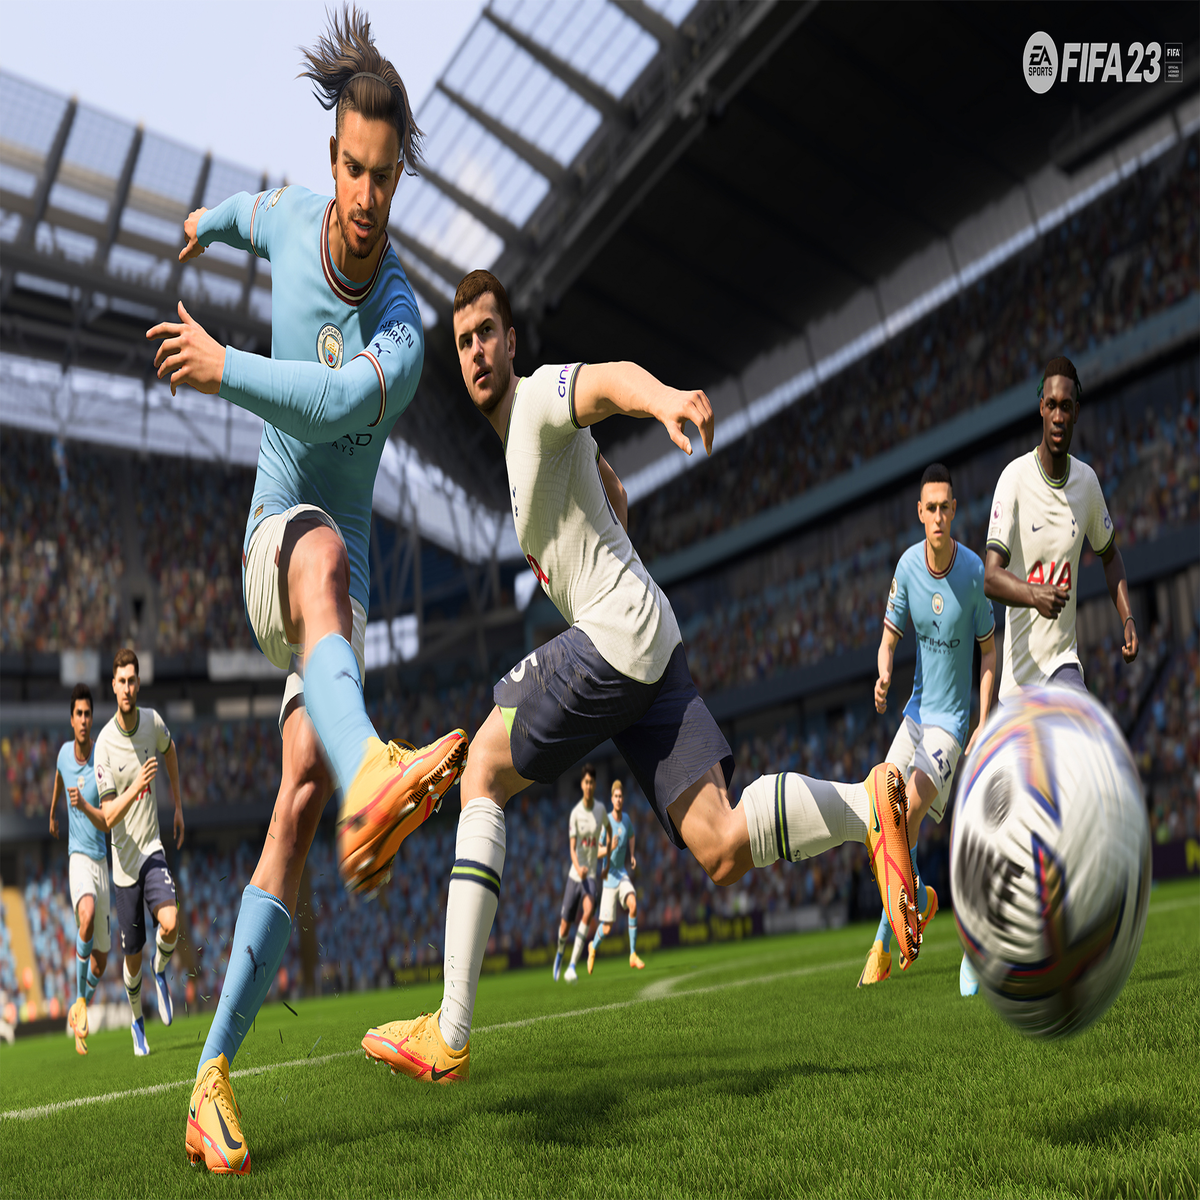 Here's where buy FIFA 23 on console and PC Eurogamer.net